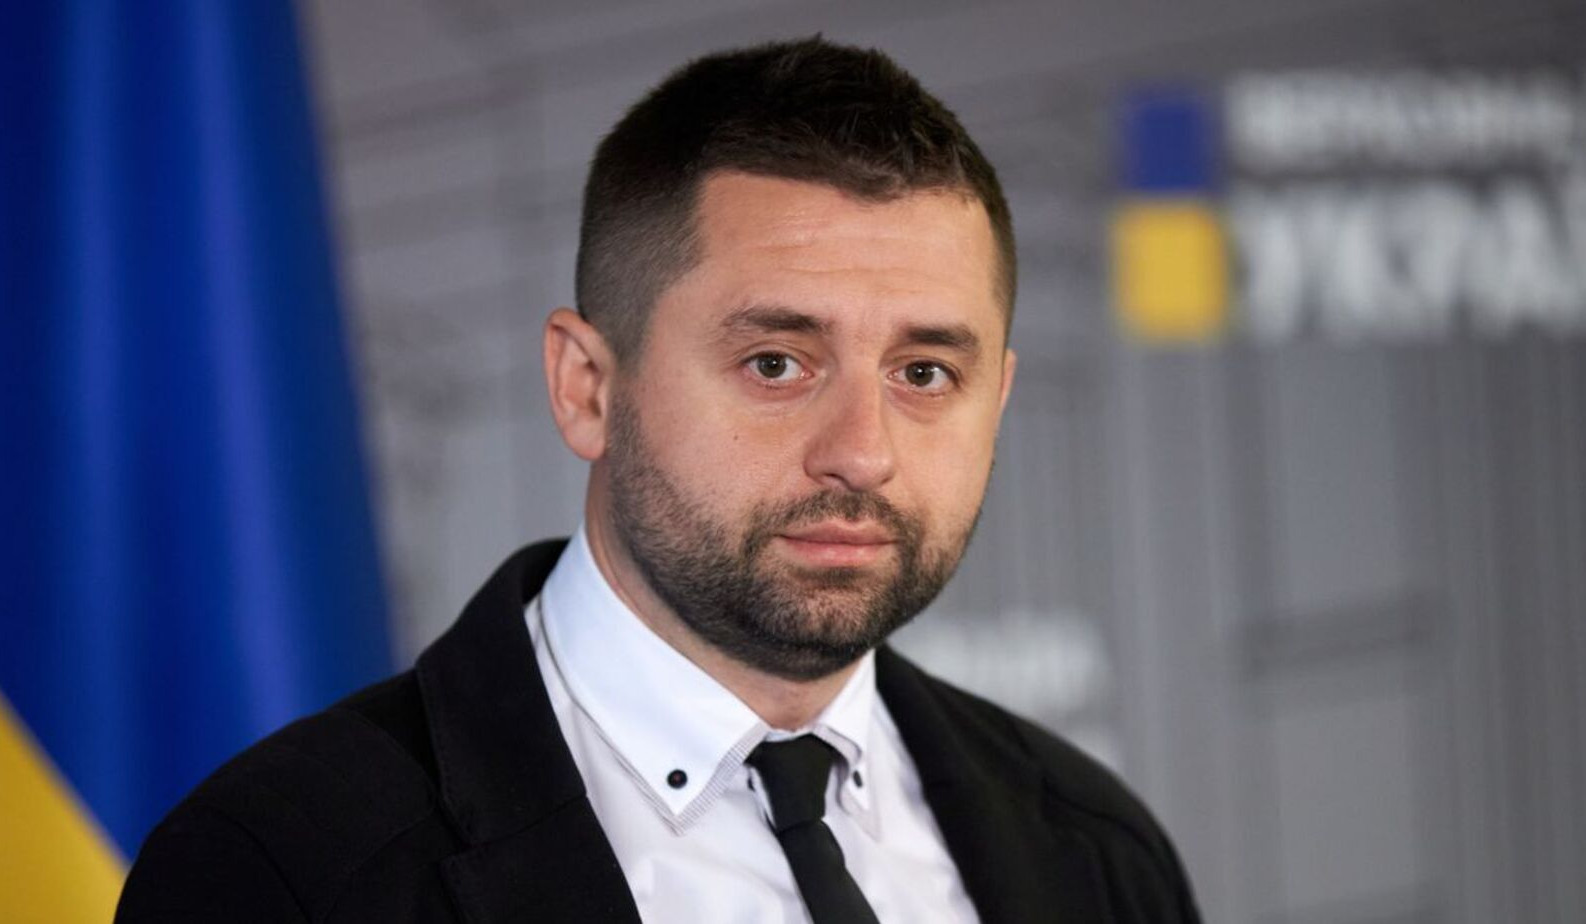 Ukrainian MP: The West and Zelensky are a big obstacle to the signing of the peace agreement